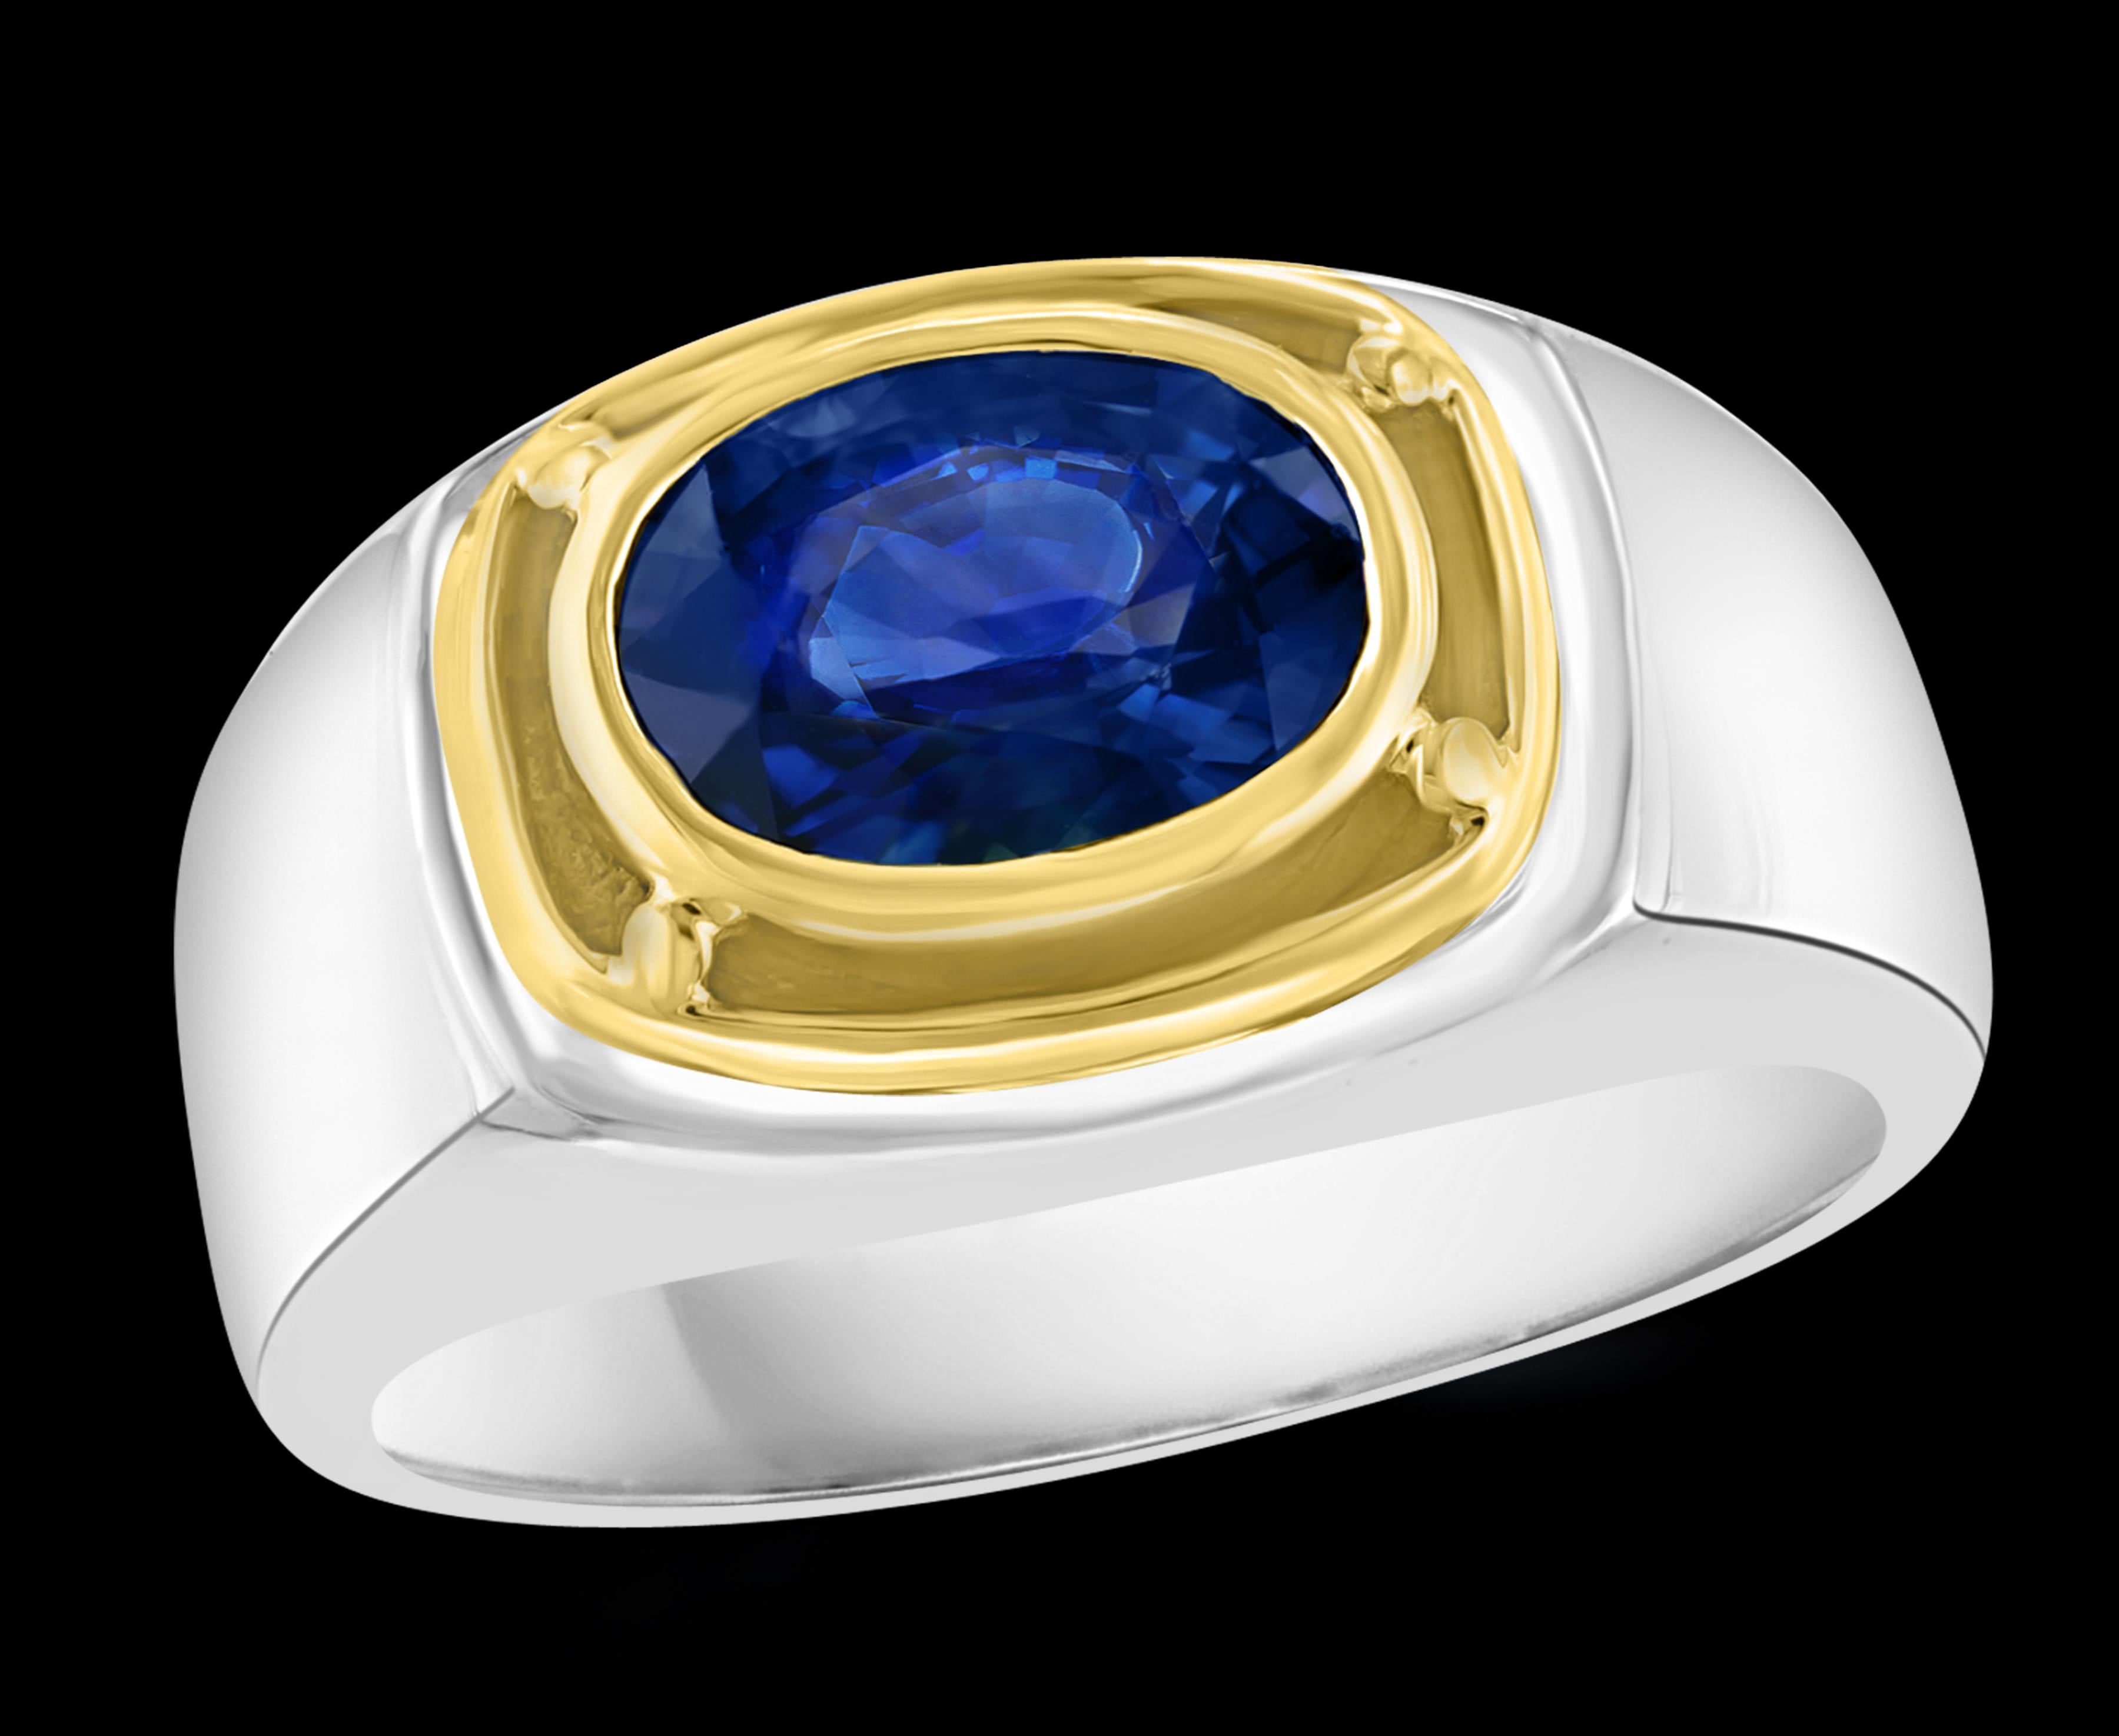 Oval Natural  Blue Sapphire & Diamond Engagement Ring in 14 Karat Yellow Gold
Approximately 1 1/2 Ct Oval Blue Sapphire 
18 Karat yellow Gold 9.2 Grams
Ring Size 5 ( it can be resized to any size for free of charge)
Natural Sapphire of nice blue